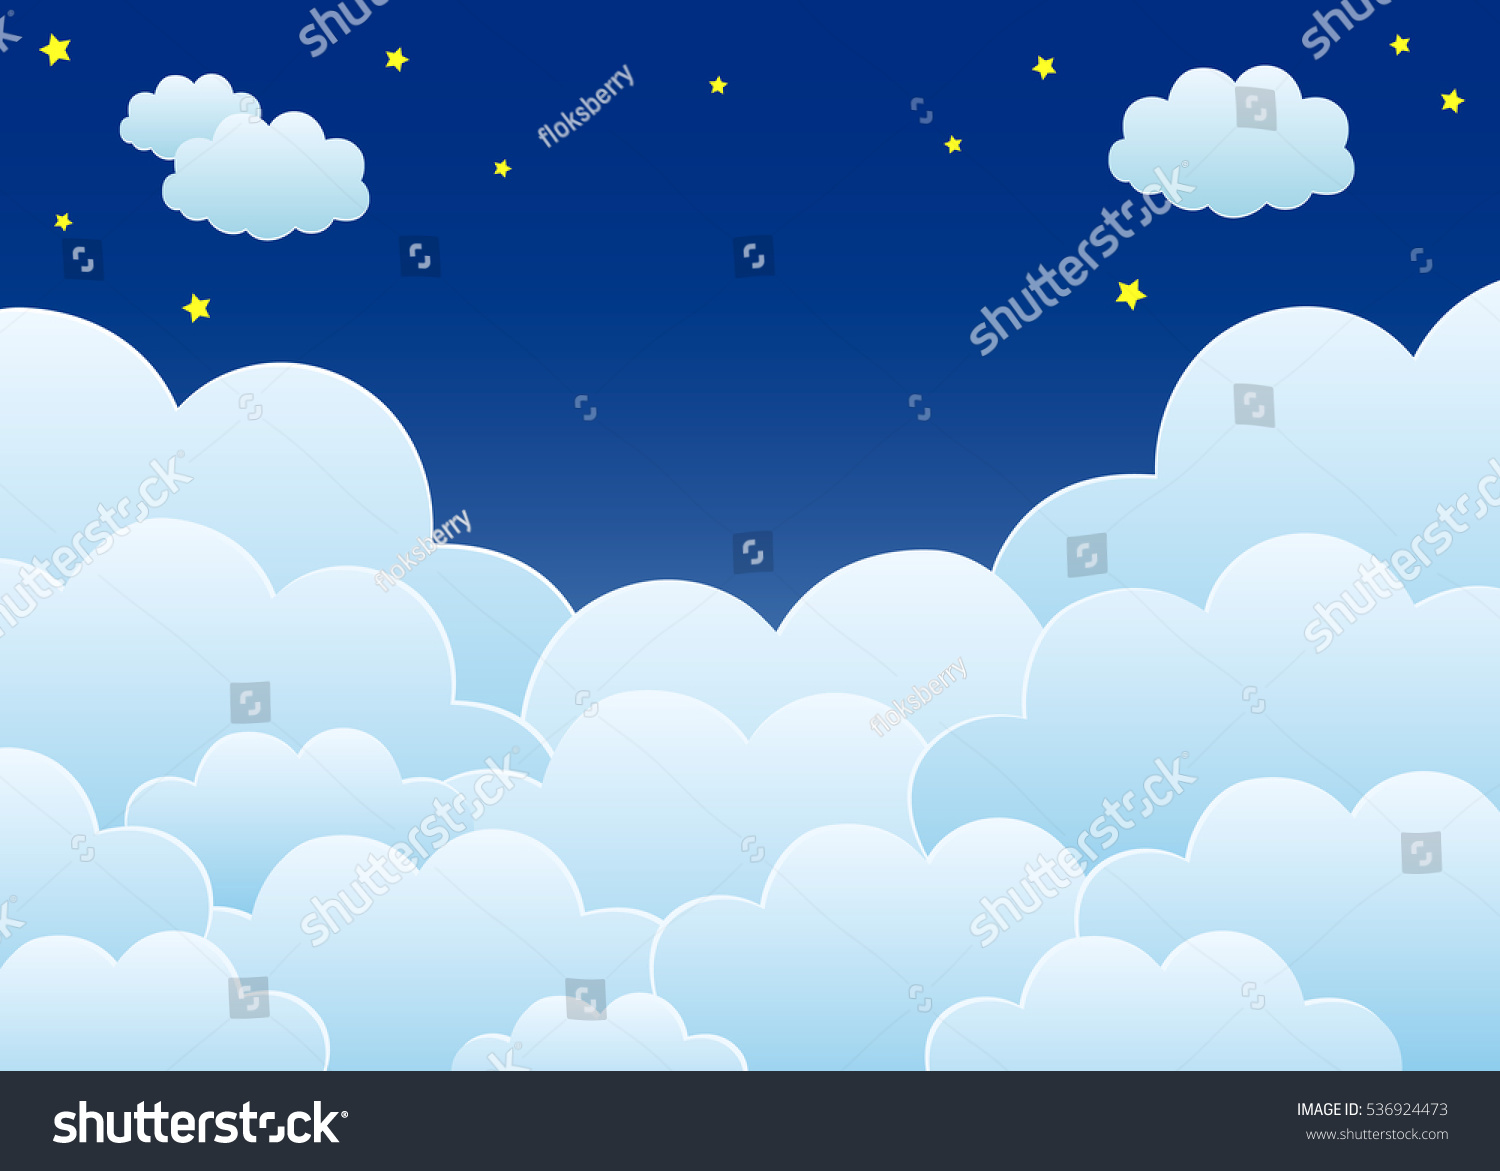 Night Sky Clouds Stars Cartoon Background Stock Vector Royalty Free